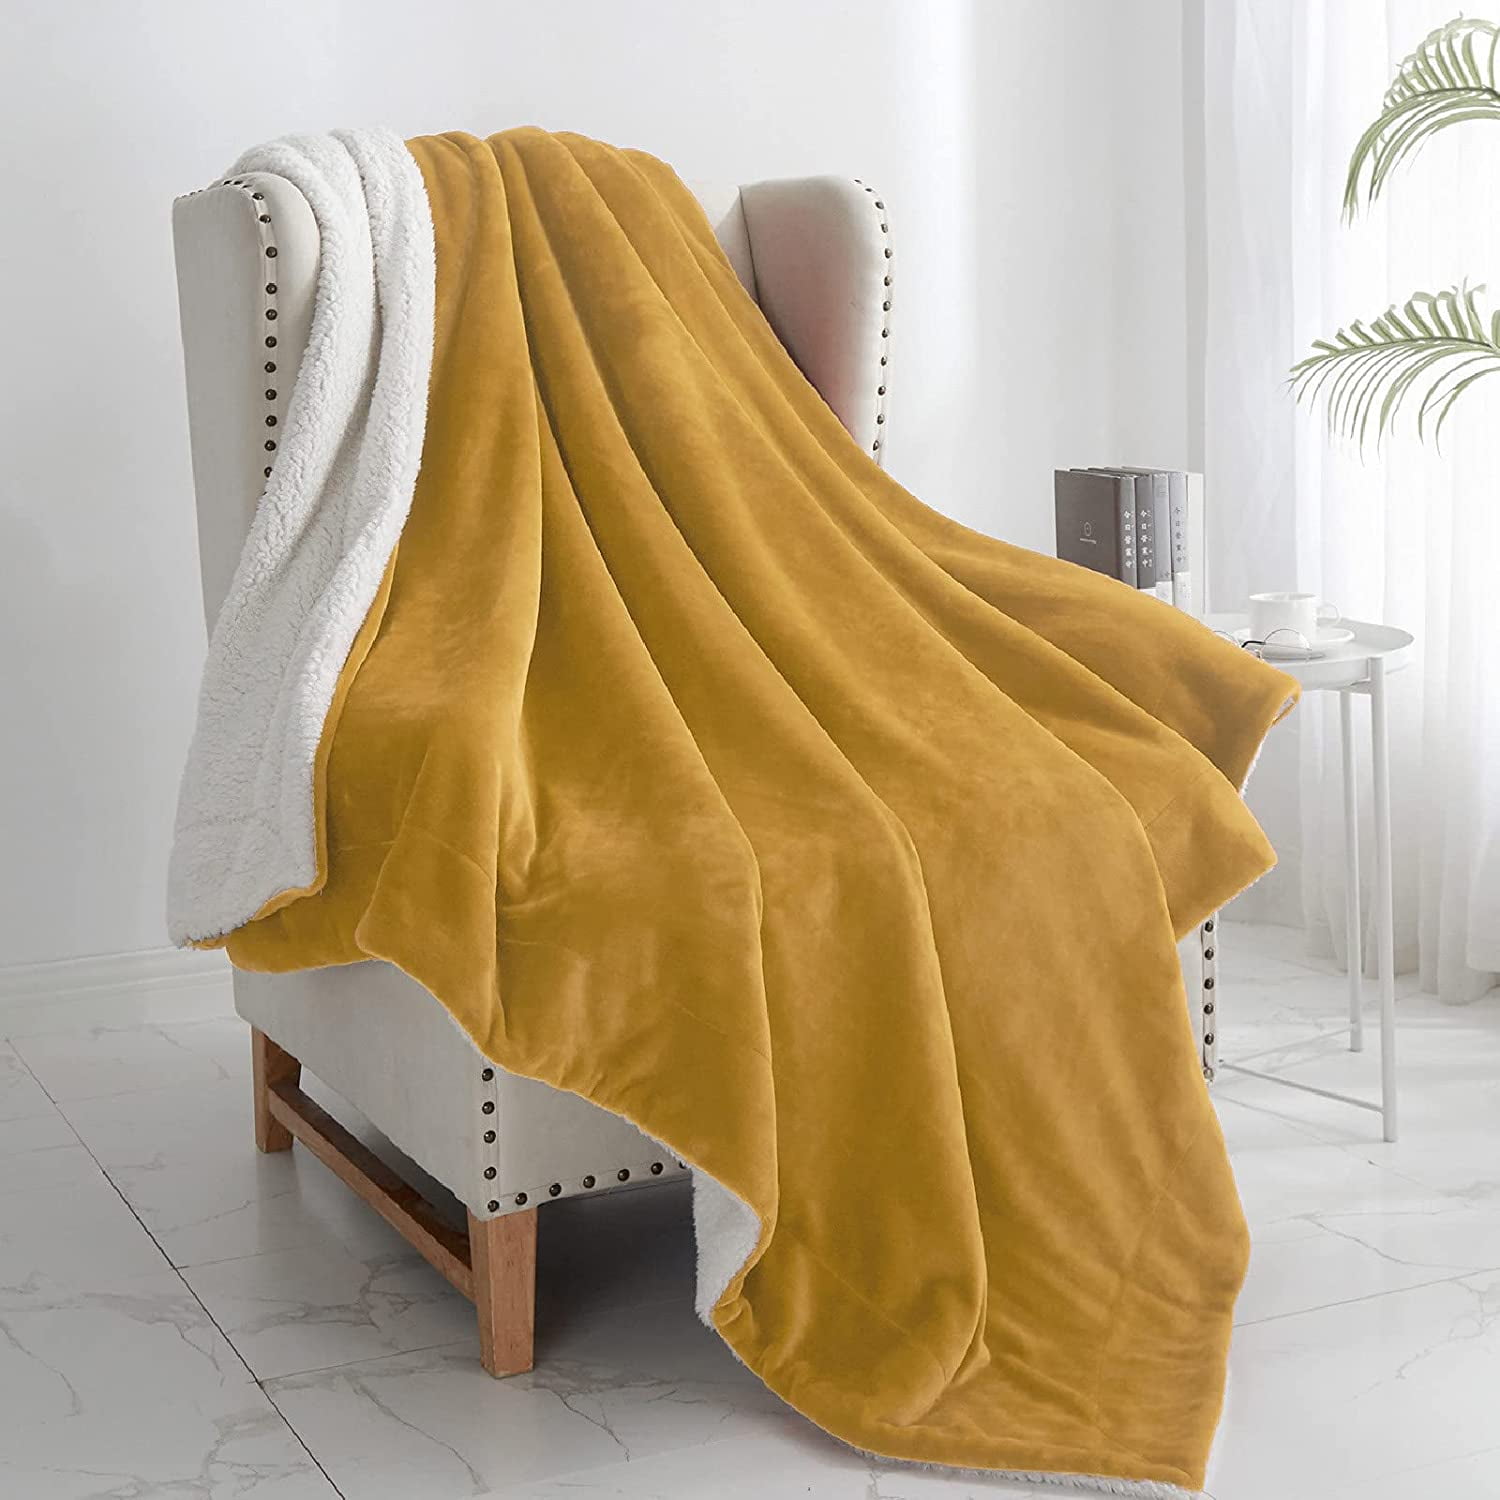 Bed Sofa Ultra Luxurious Warm and Cozy for All Seasons Walensee Sherpa Fleece Blanket Twin Size 60”x80” Honey Gold Plush Throw Fuzzy Super Soft Reversible Microfiber Flannel Blankets for Couch